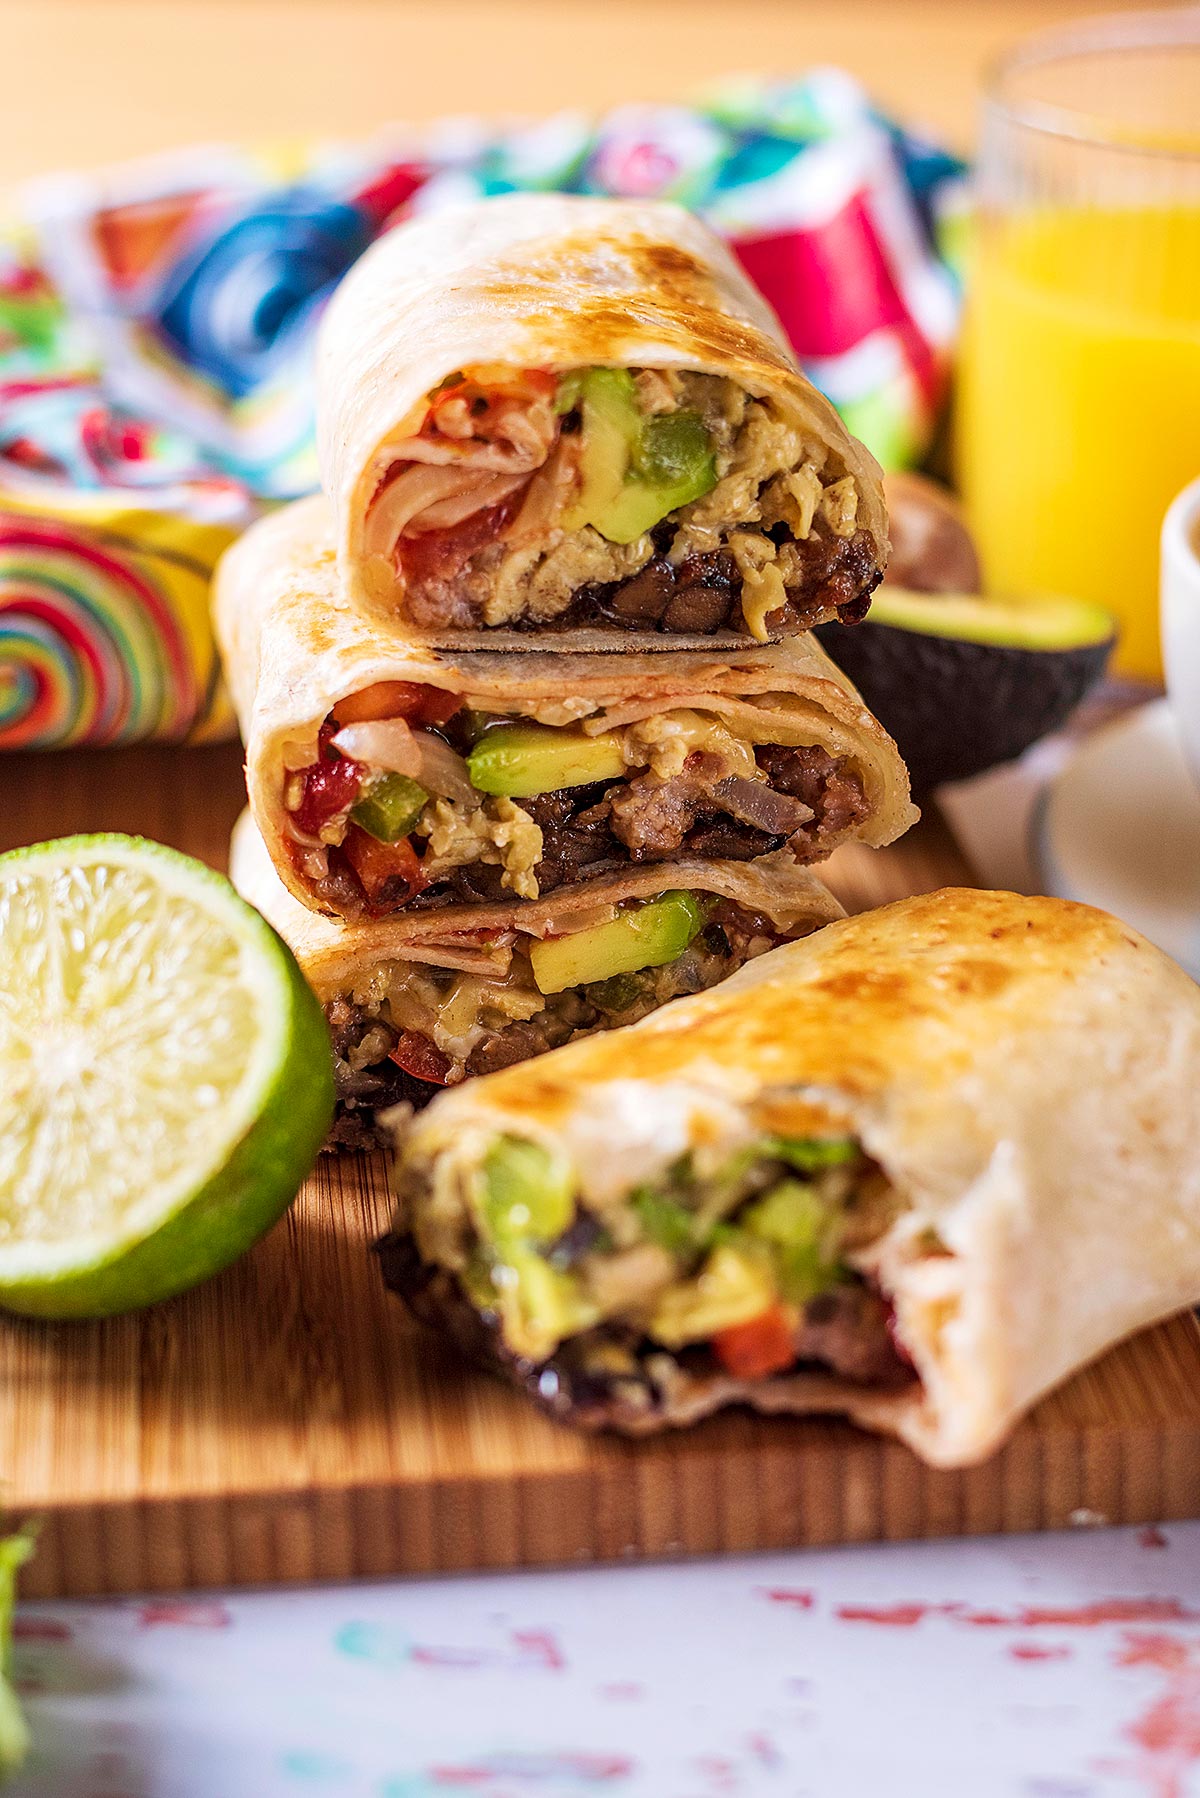 A stack of burritos on a wooden surface.